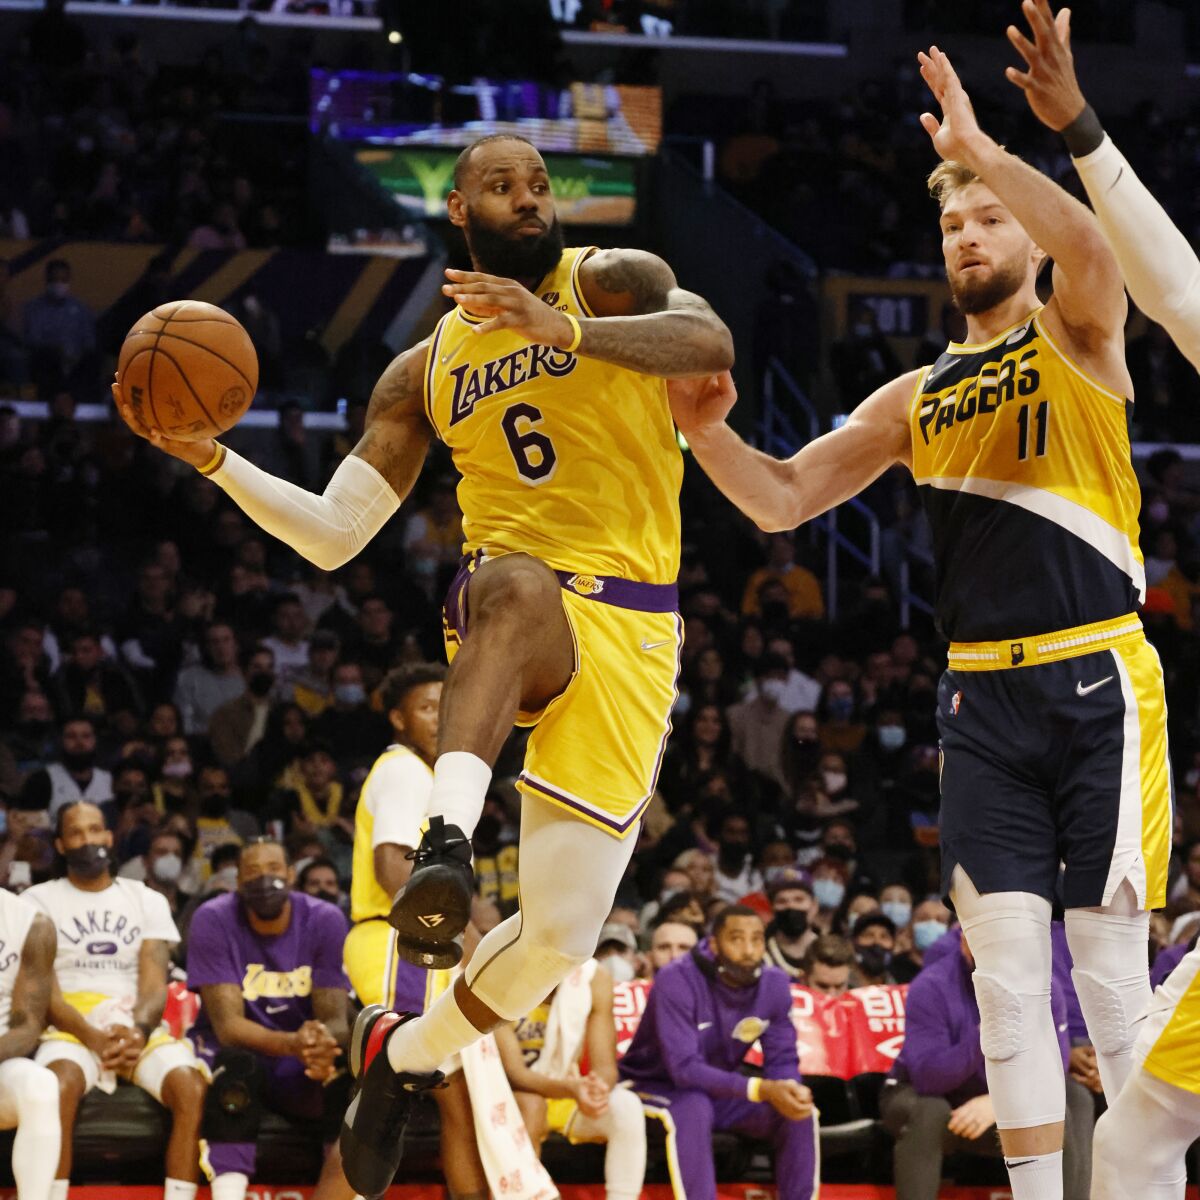 Lakers forward LeBron James leaps on the baseline to pass against Indiana Pacers forward Domantas Sabonis.